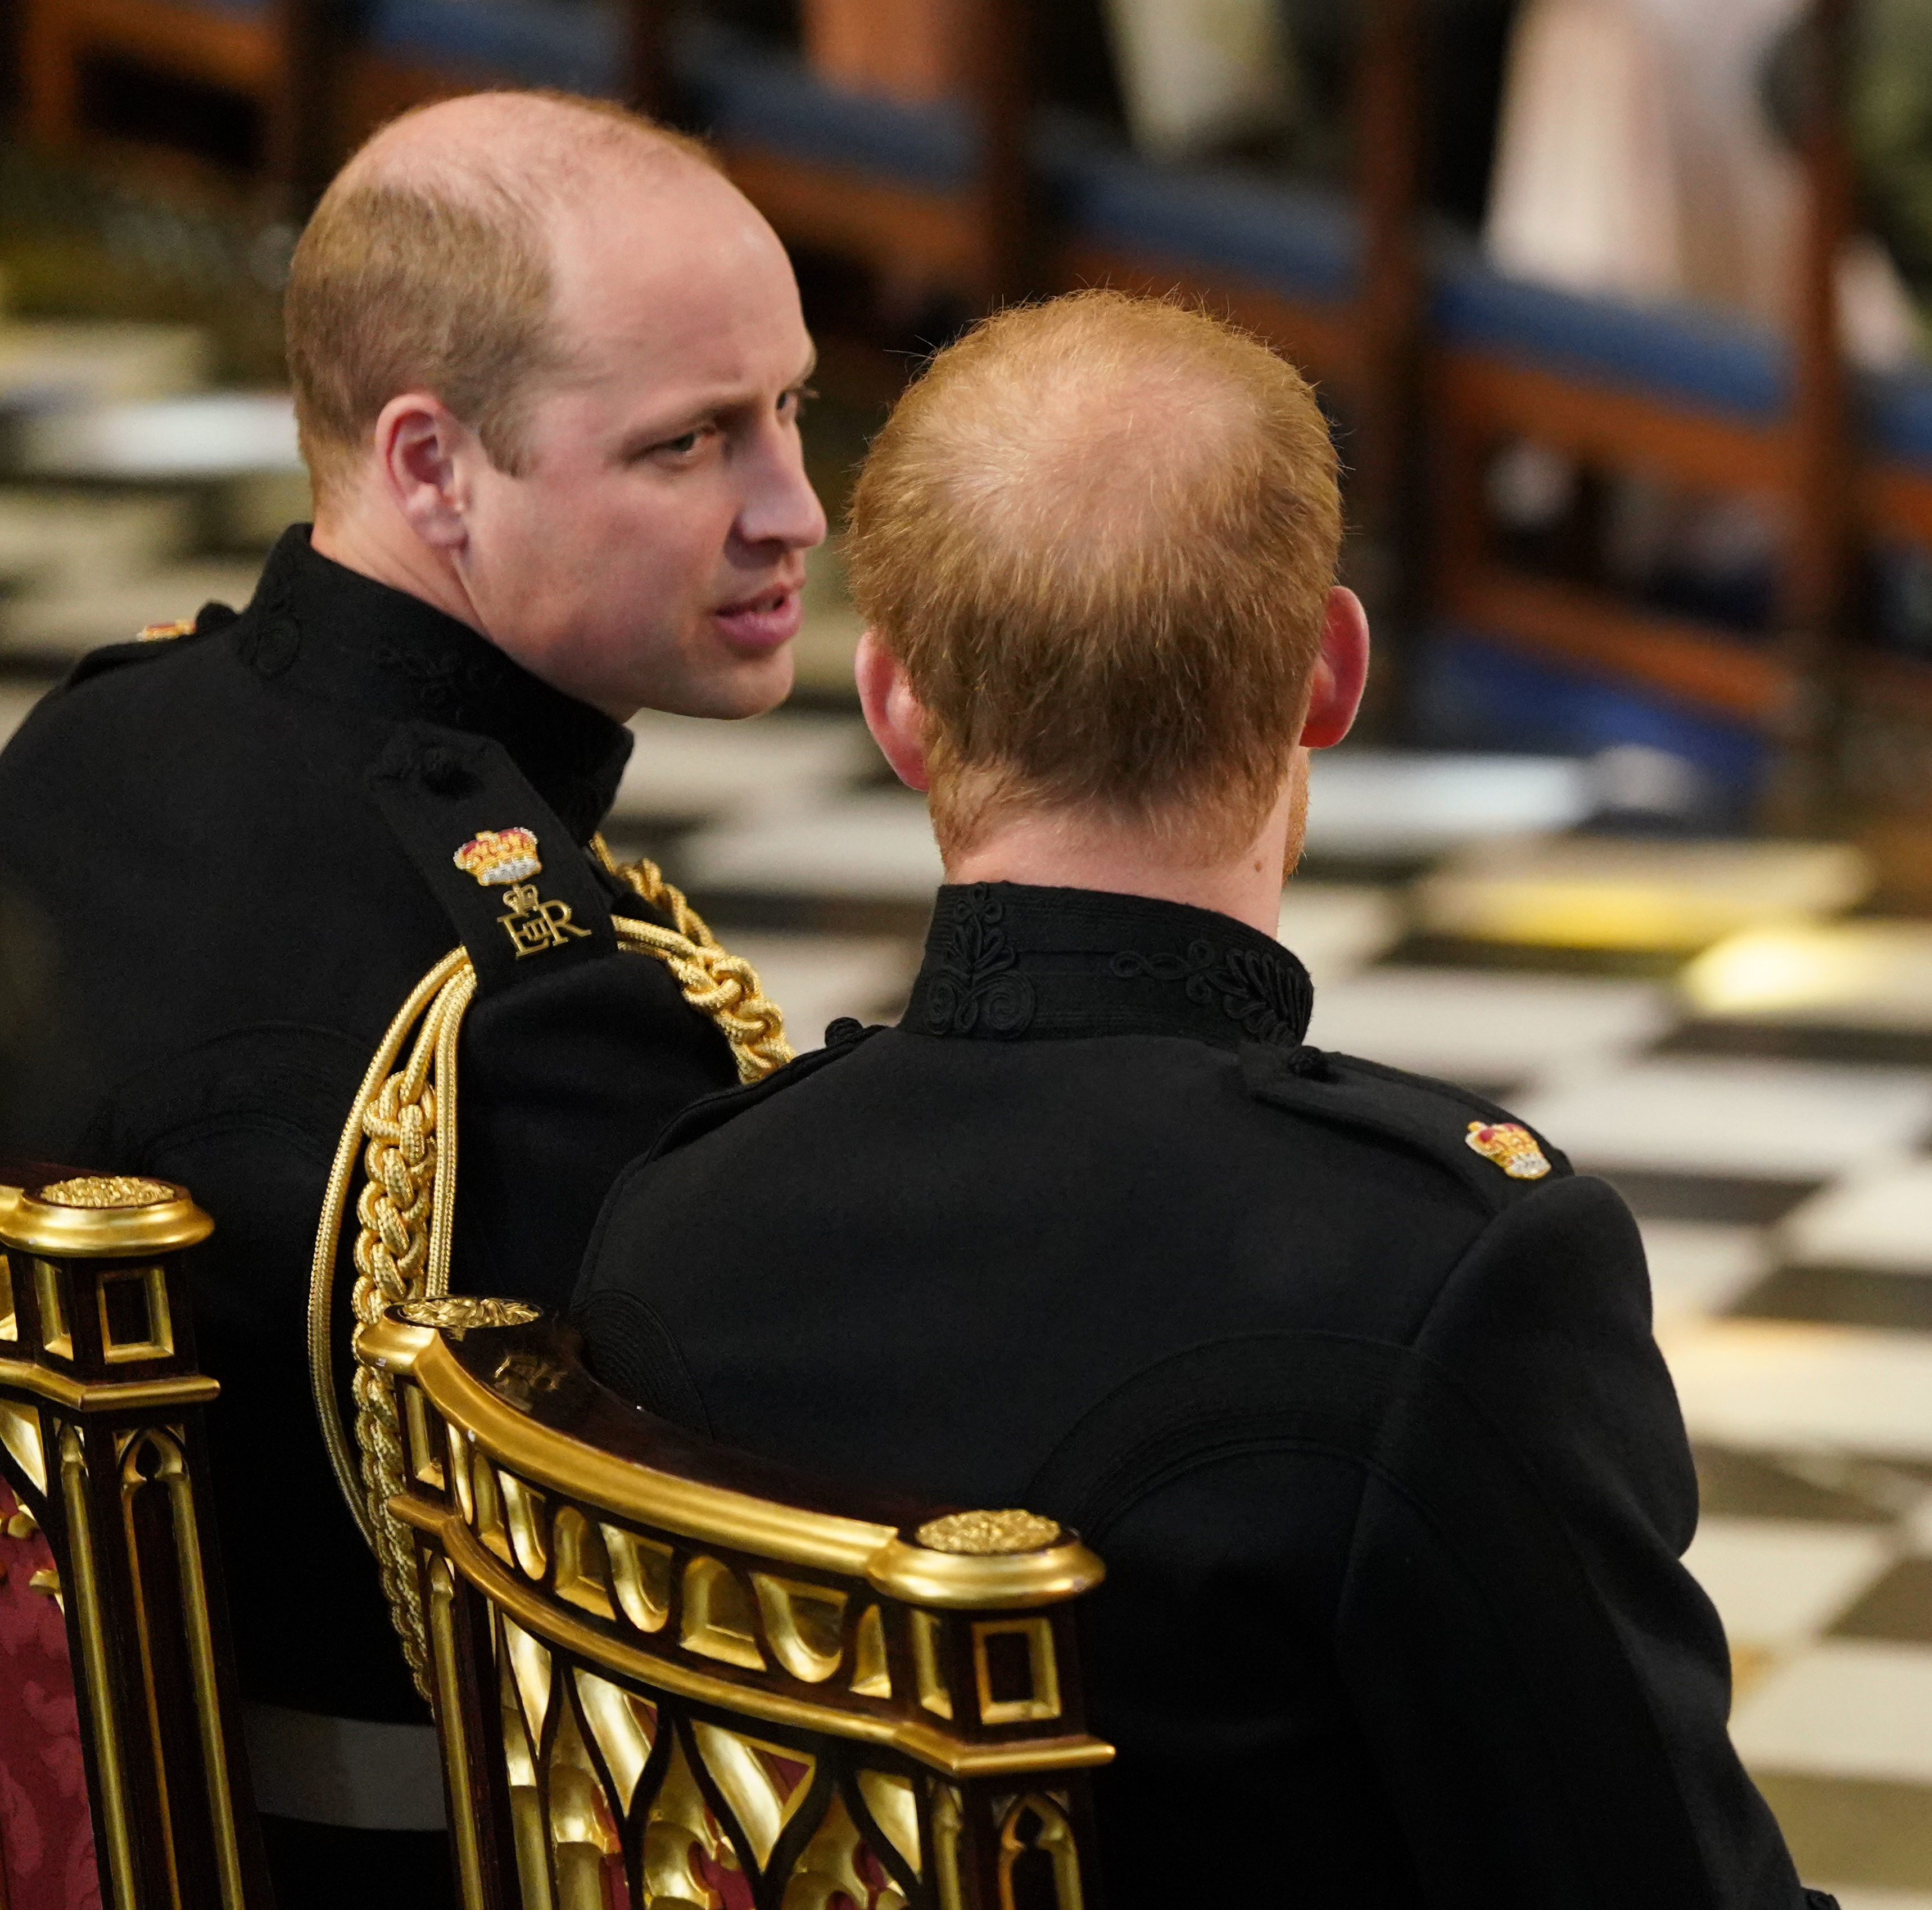 Prince Harry sitting down and chatting with Prince William before his royal wedding to Meghan Markle